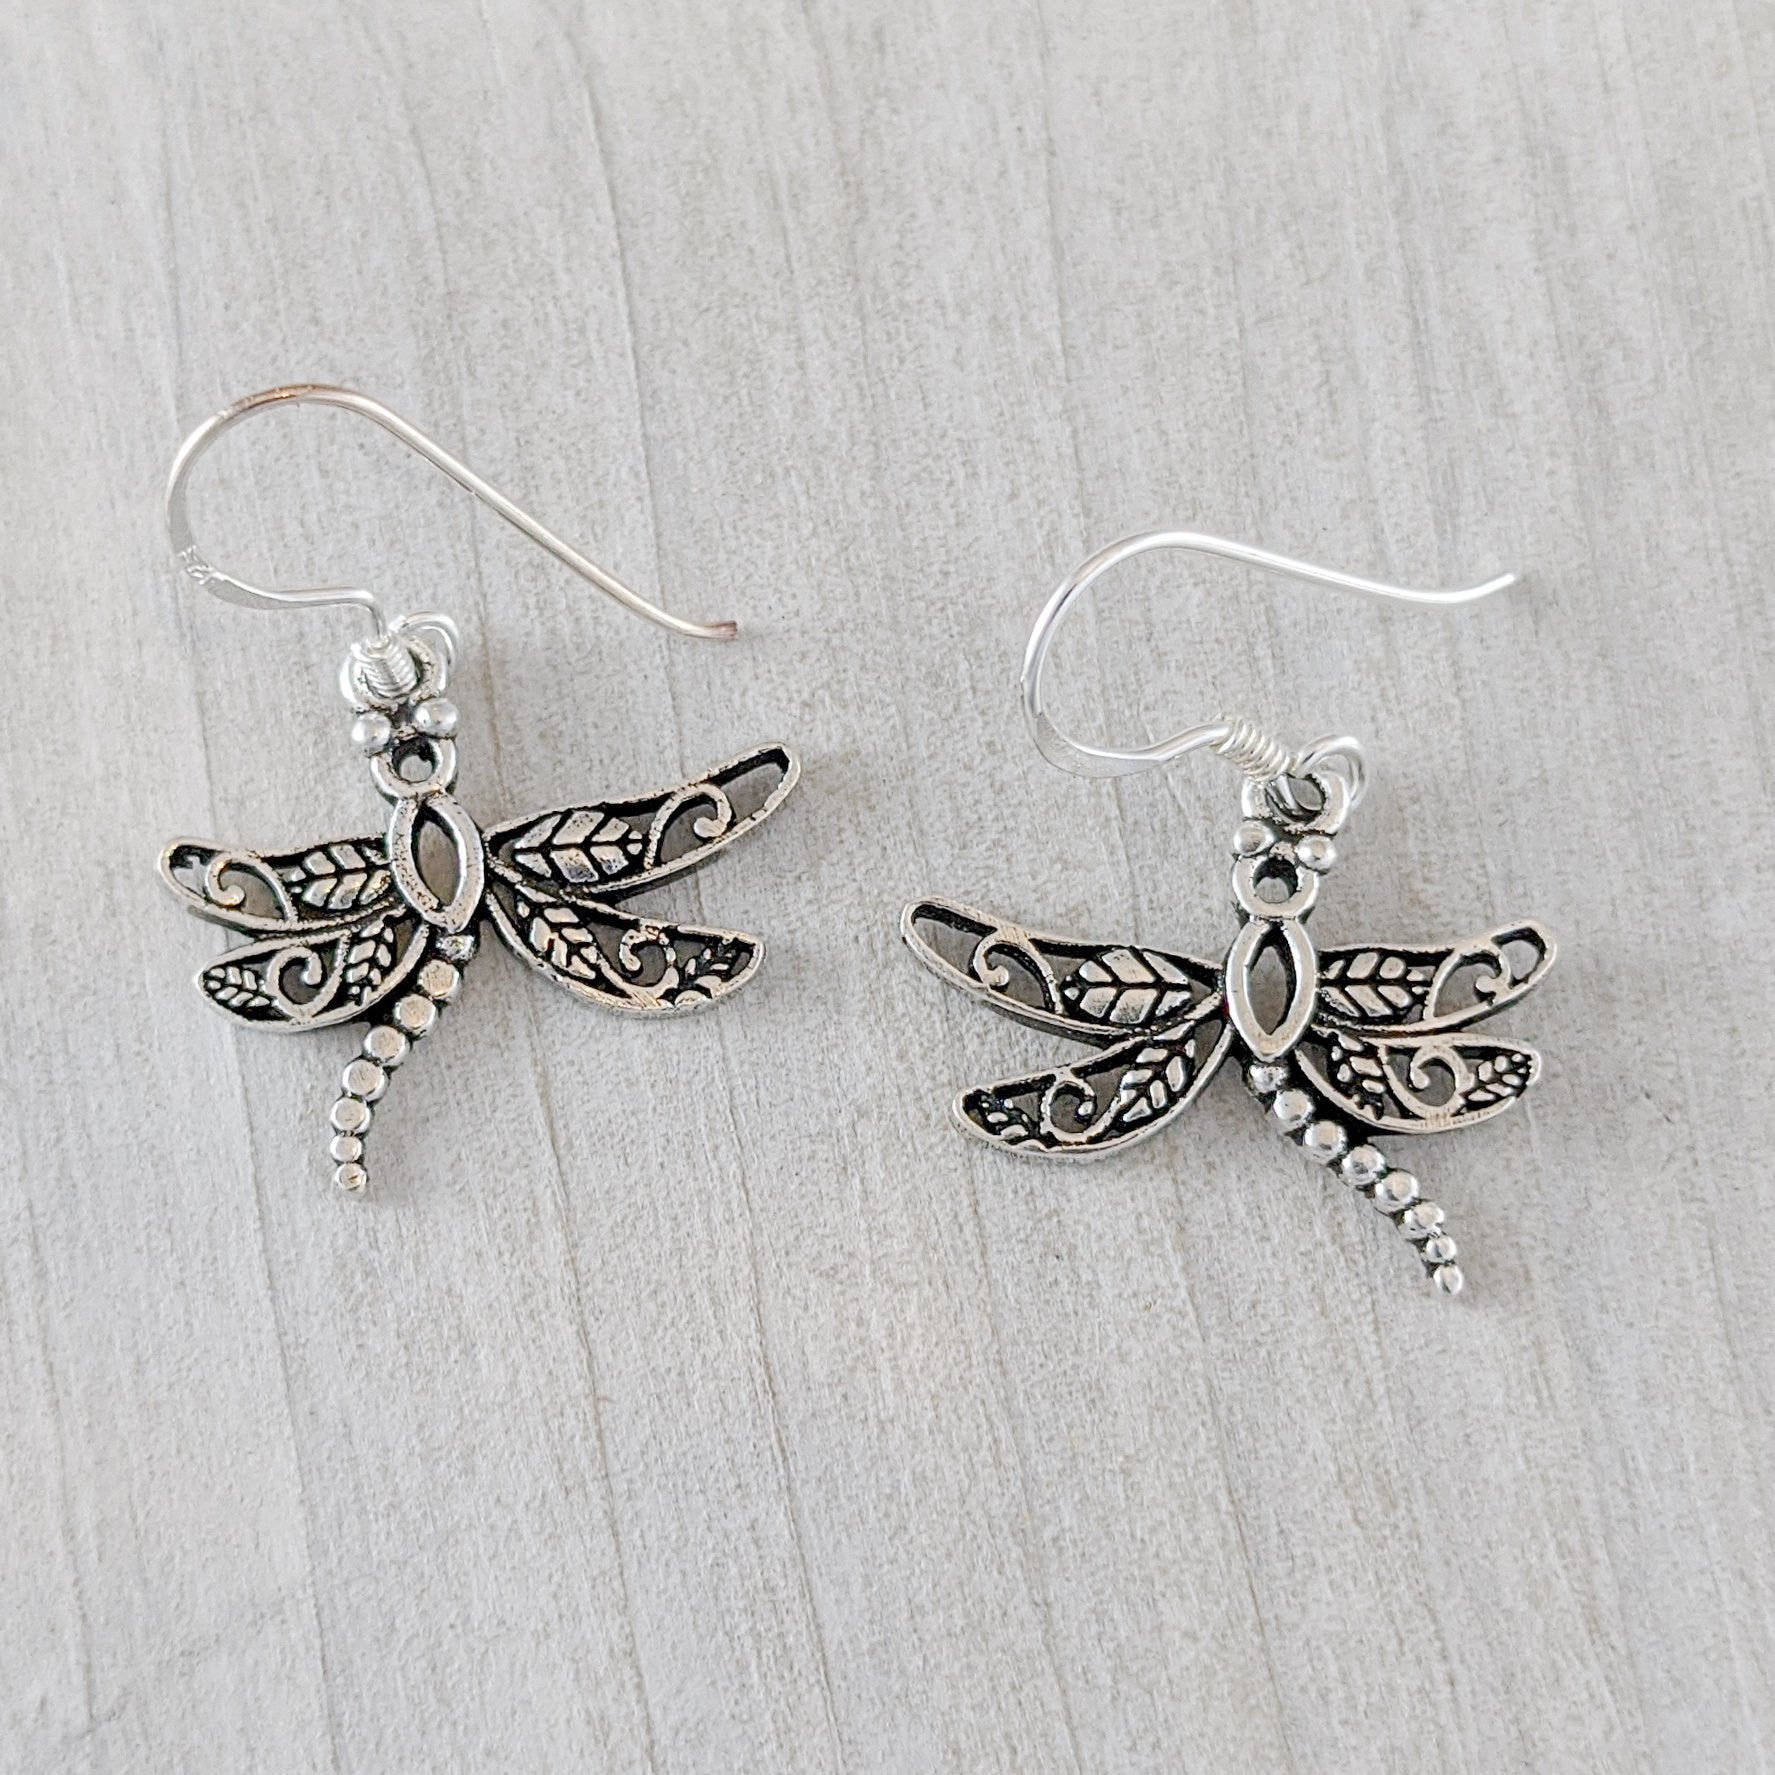 Dragonfly Earrings with Unique Wings